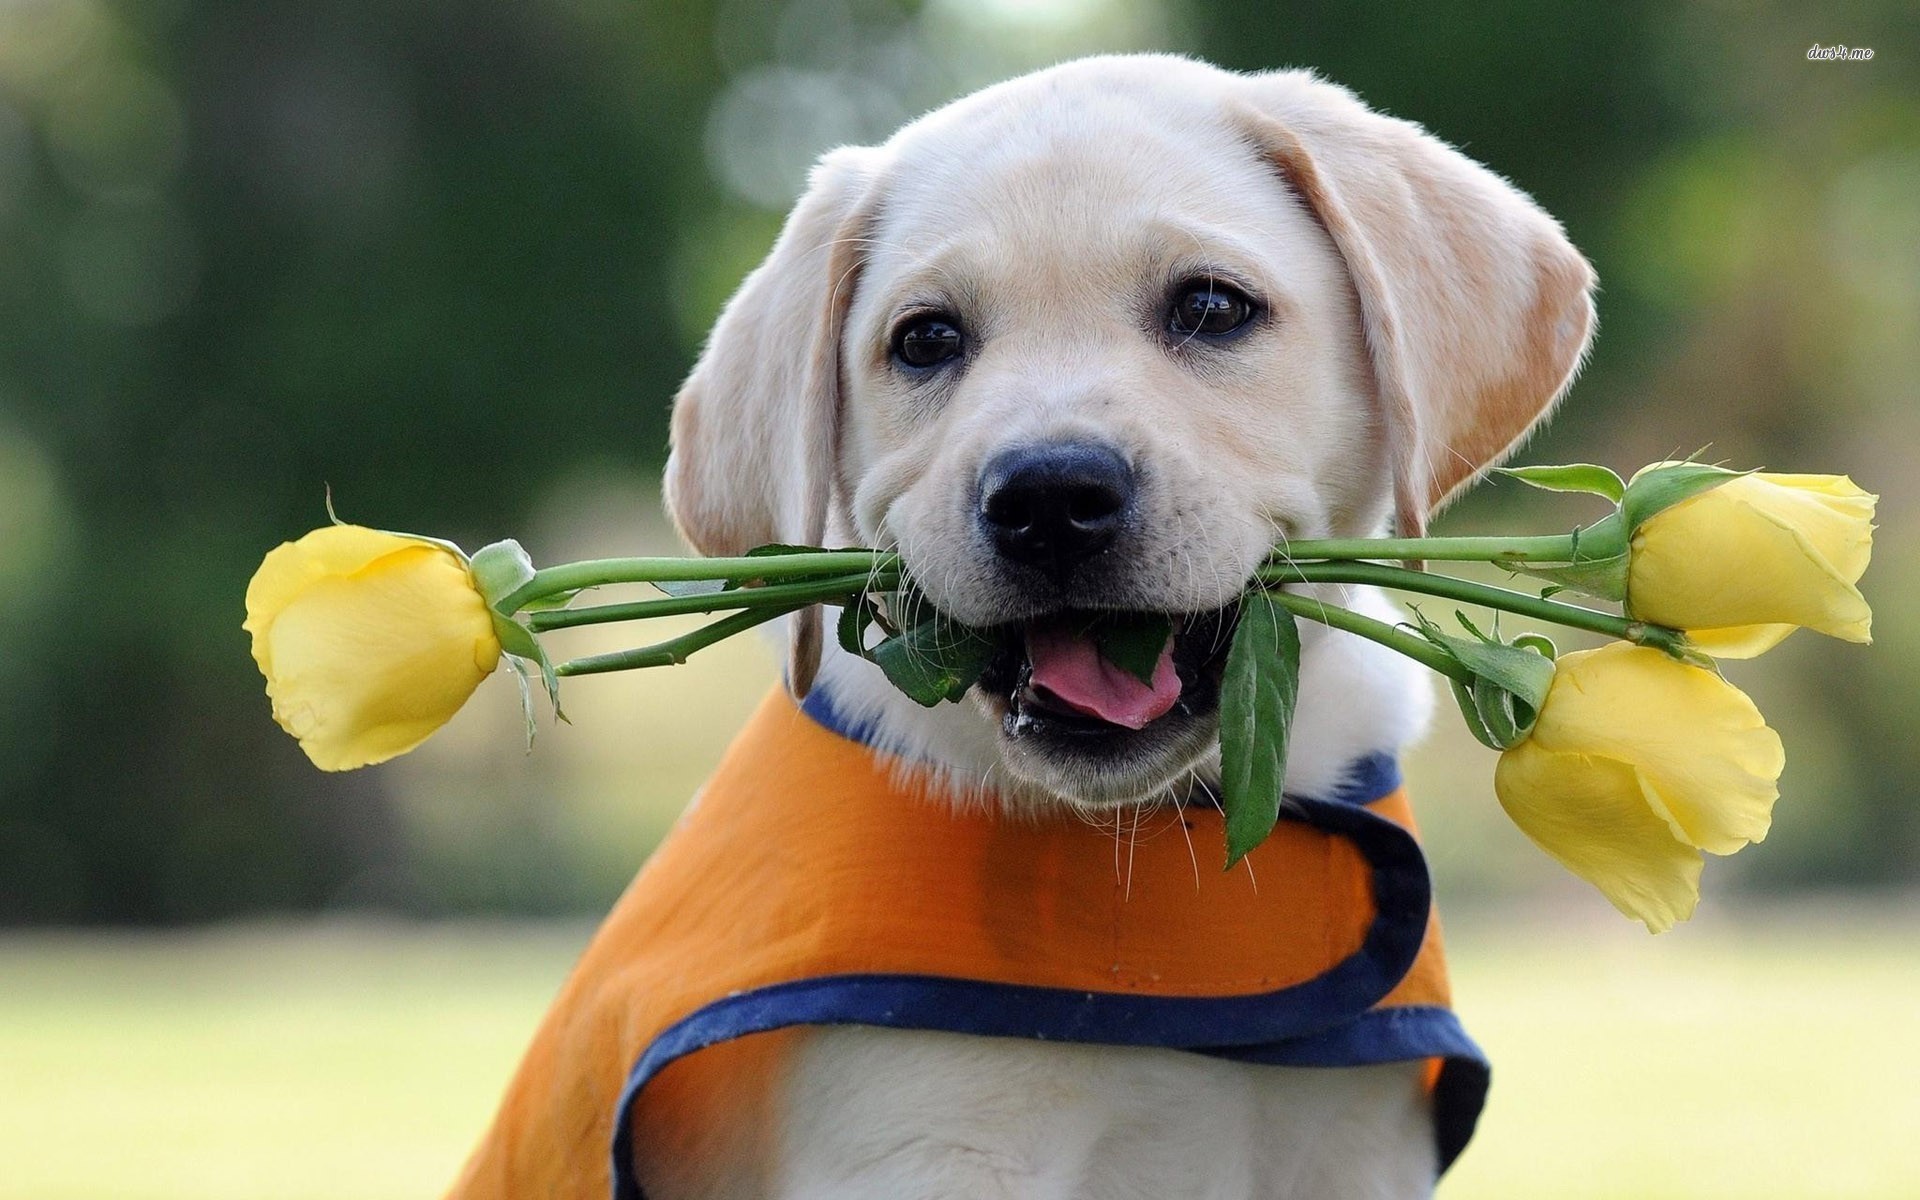 Labrador puppy with yellow roses Animal HD desktop wallpaper, Rose wallpaper, Dog wallpaper, Puppy wallpaper, Labrador wallpaper – Animals no